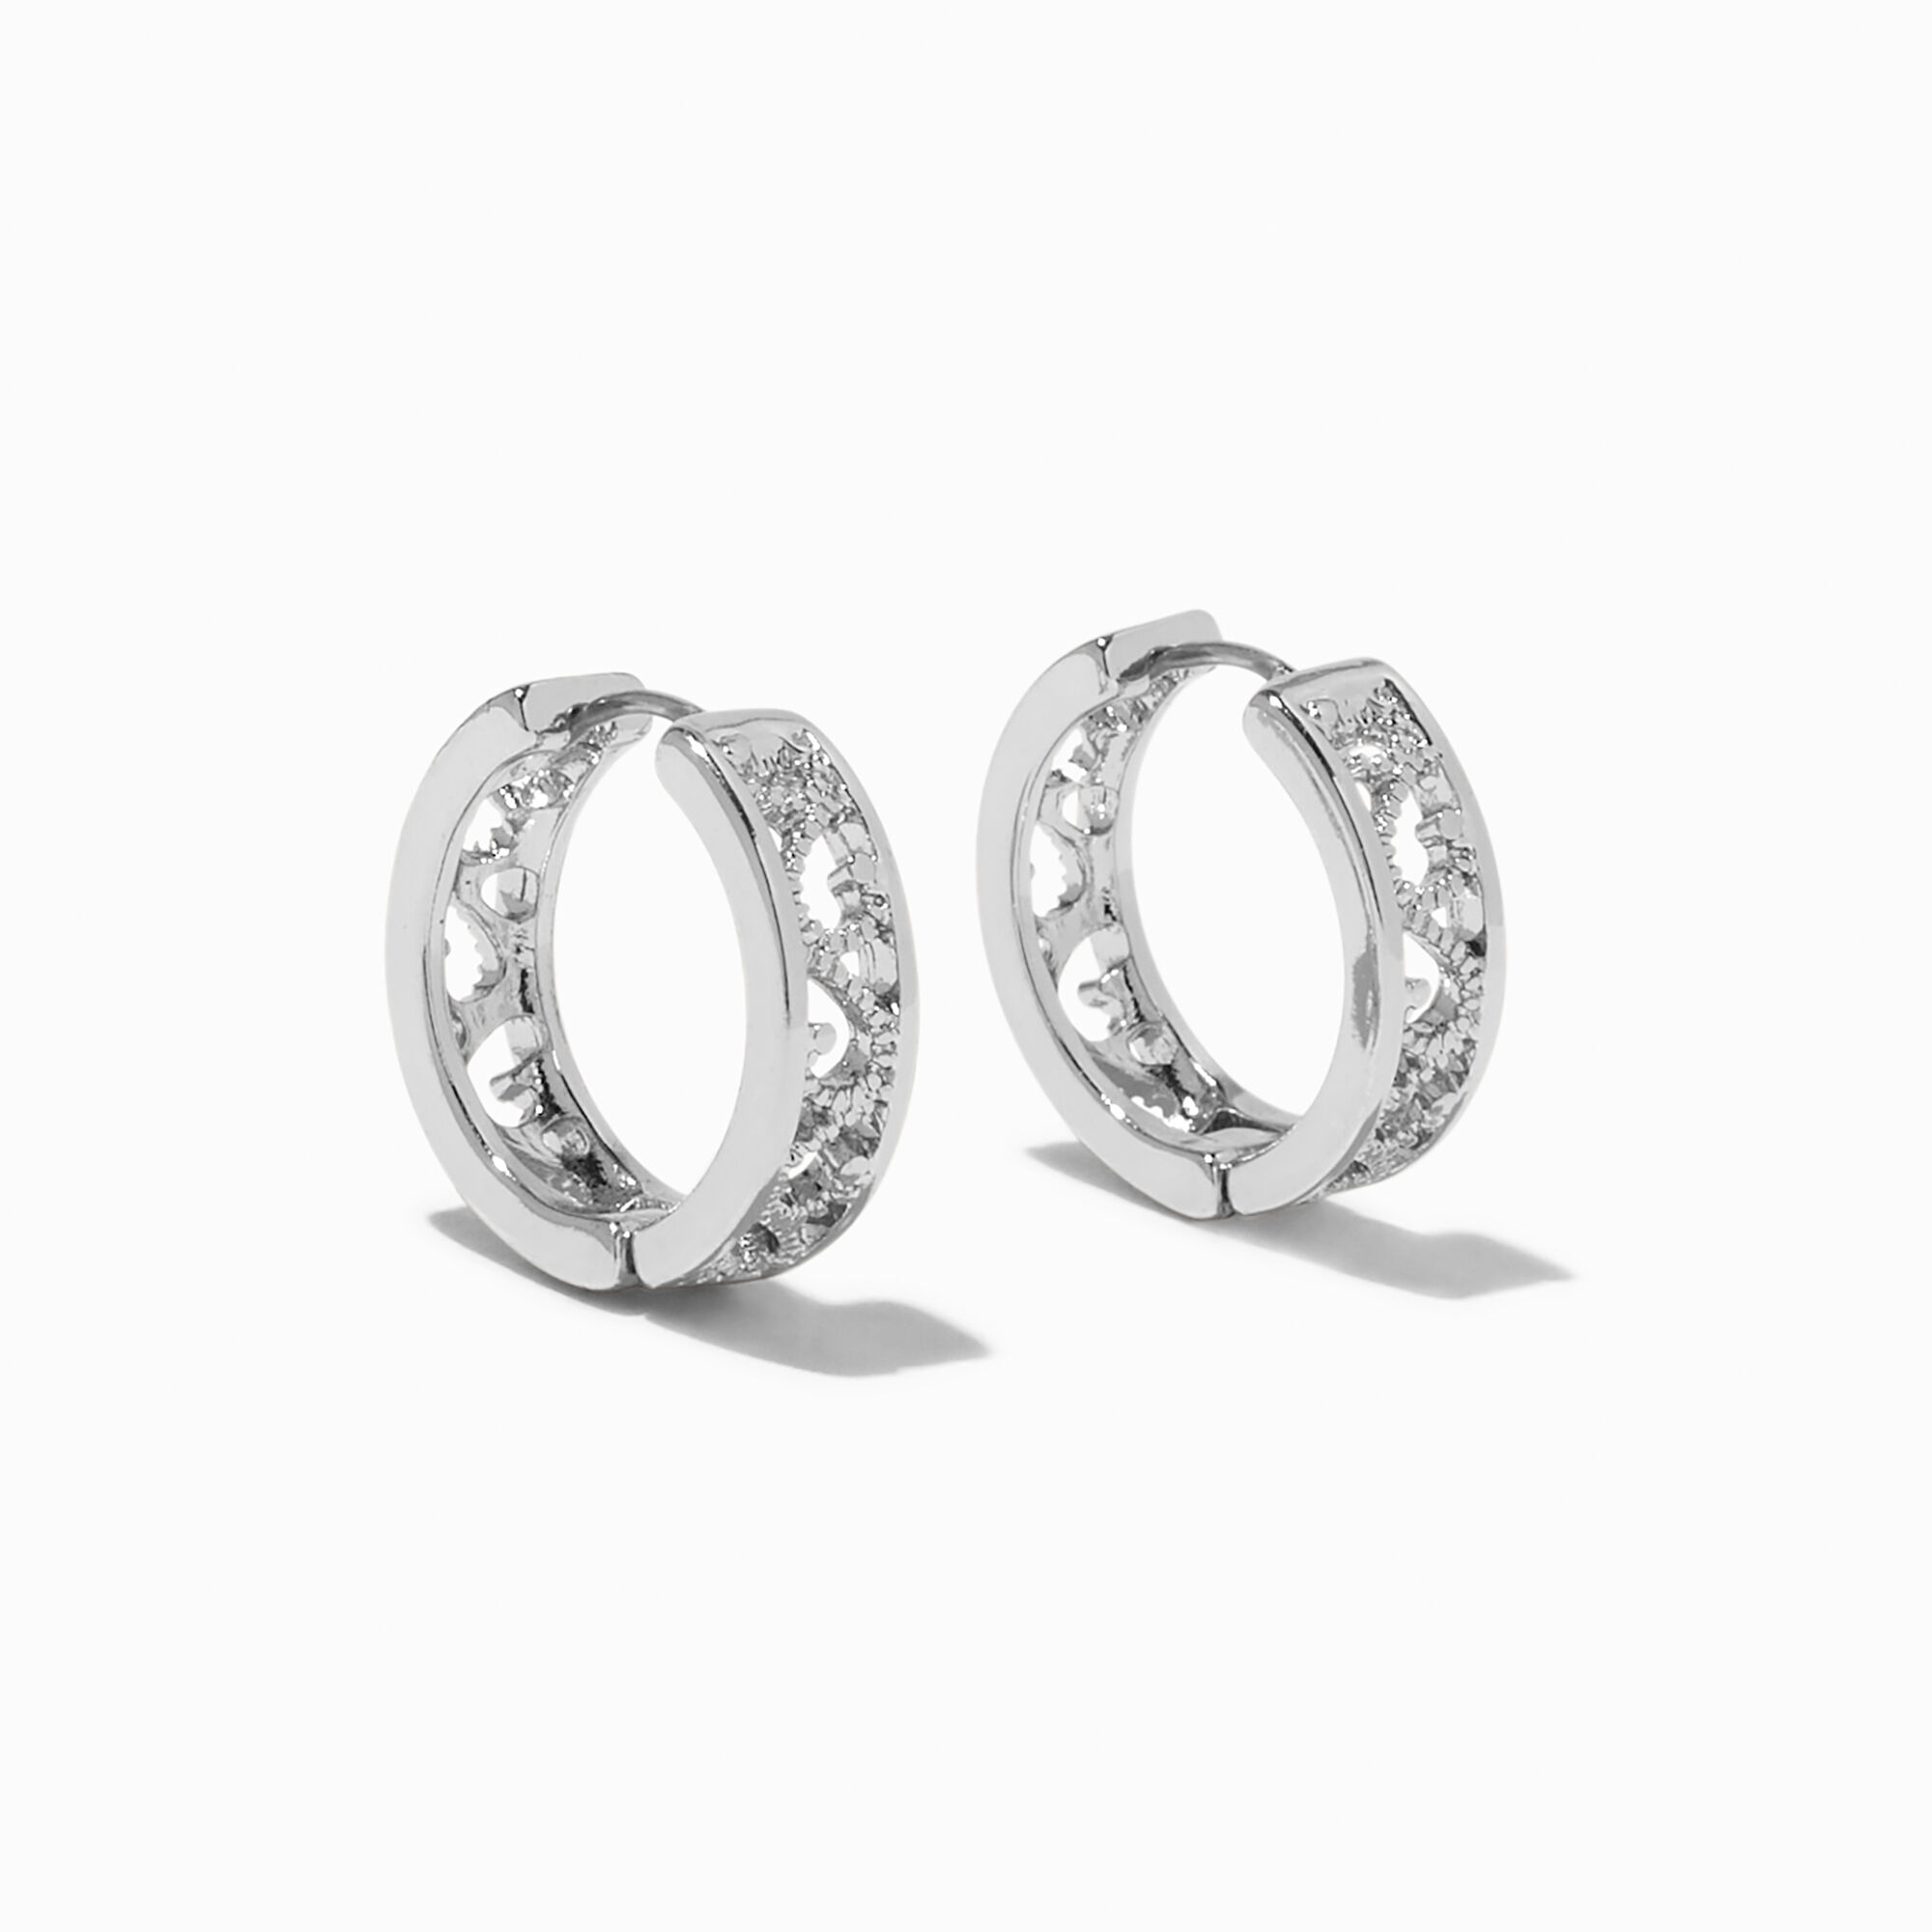 View Claires Tone 20MM Filigree Clicker Hoop Earrings Silver information